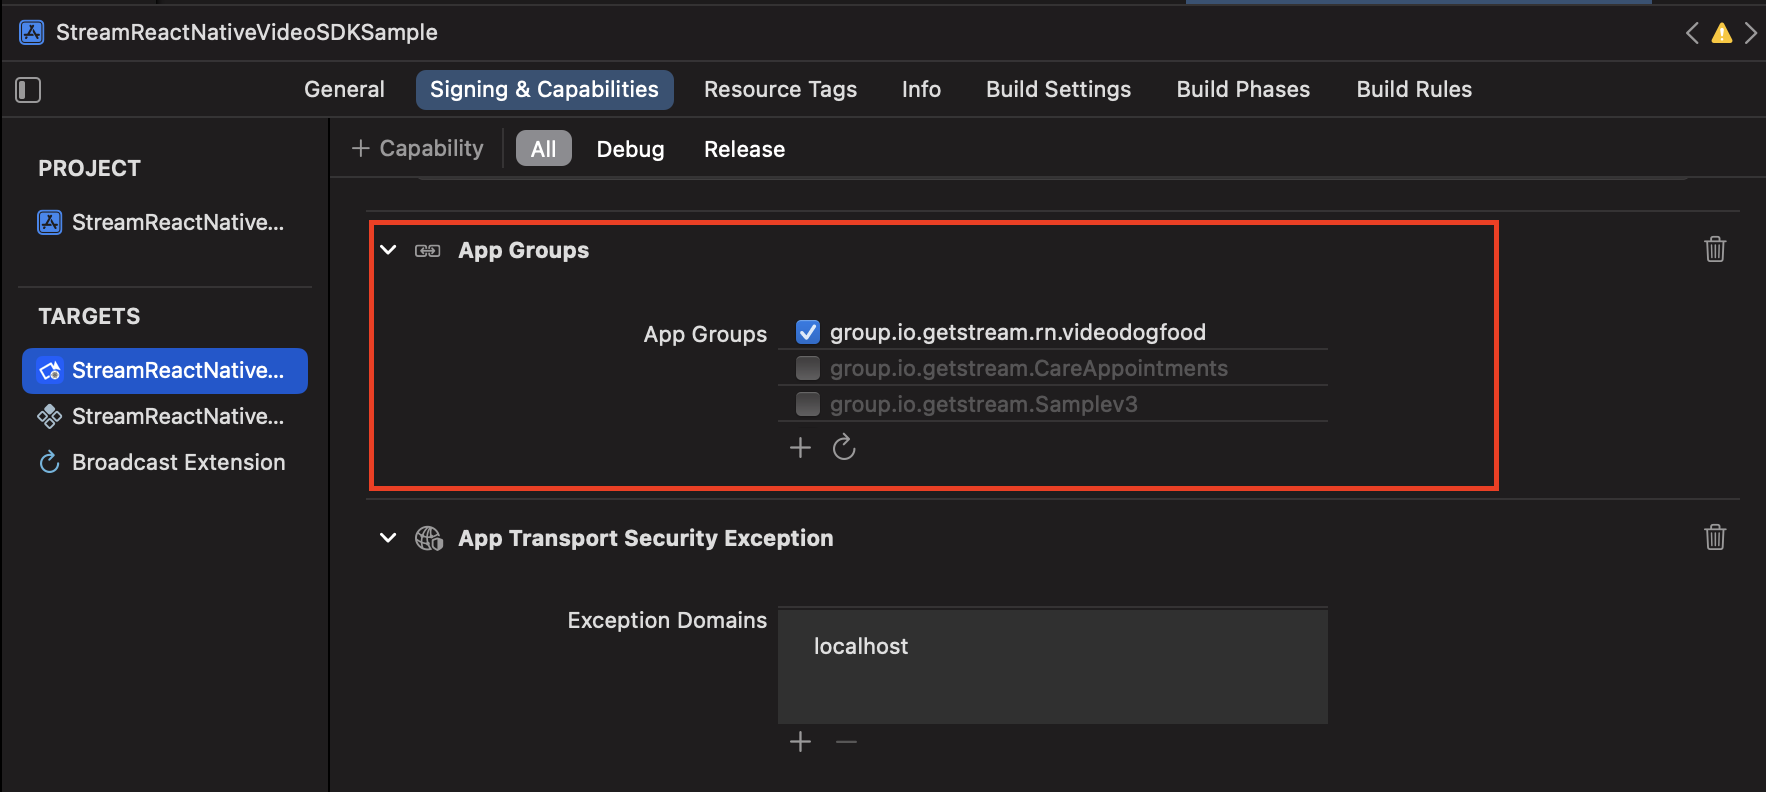 Preview of adding App Groups Capability